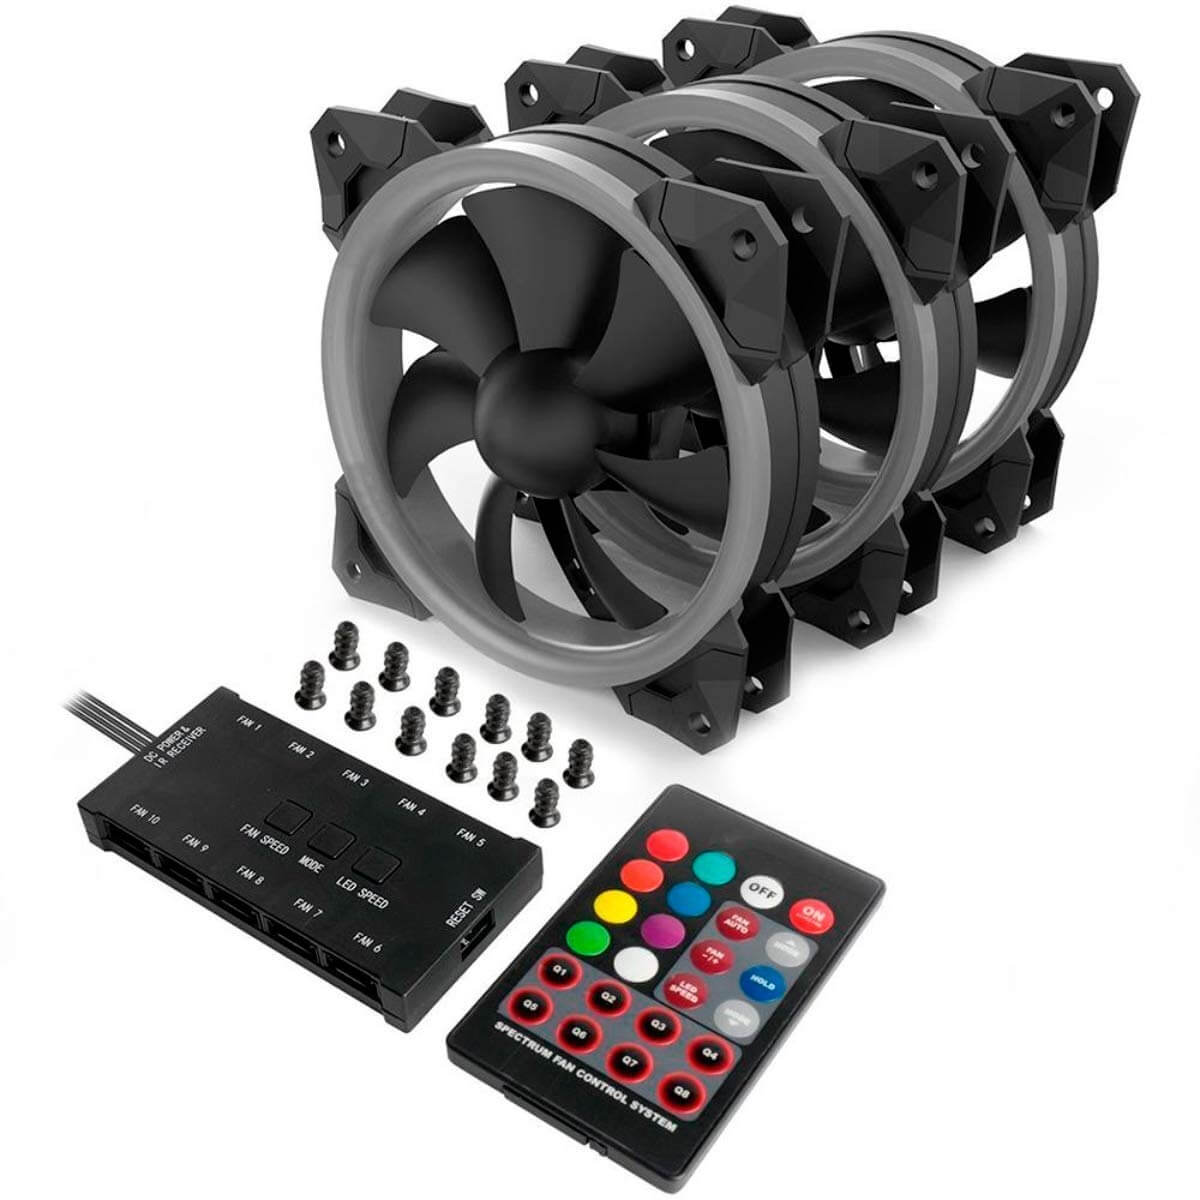 Redragon GCF008 Computer Case 120mm PC Cooling Fan, RGB LED Quiet High Airflow Adjustable Color LED Fan, CPU Cooler and Radiators 3 Packs